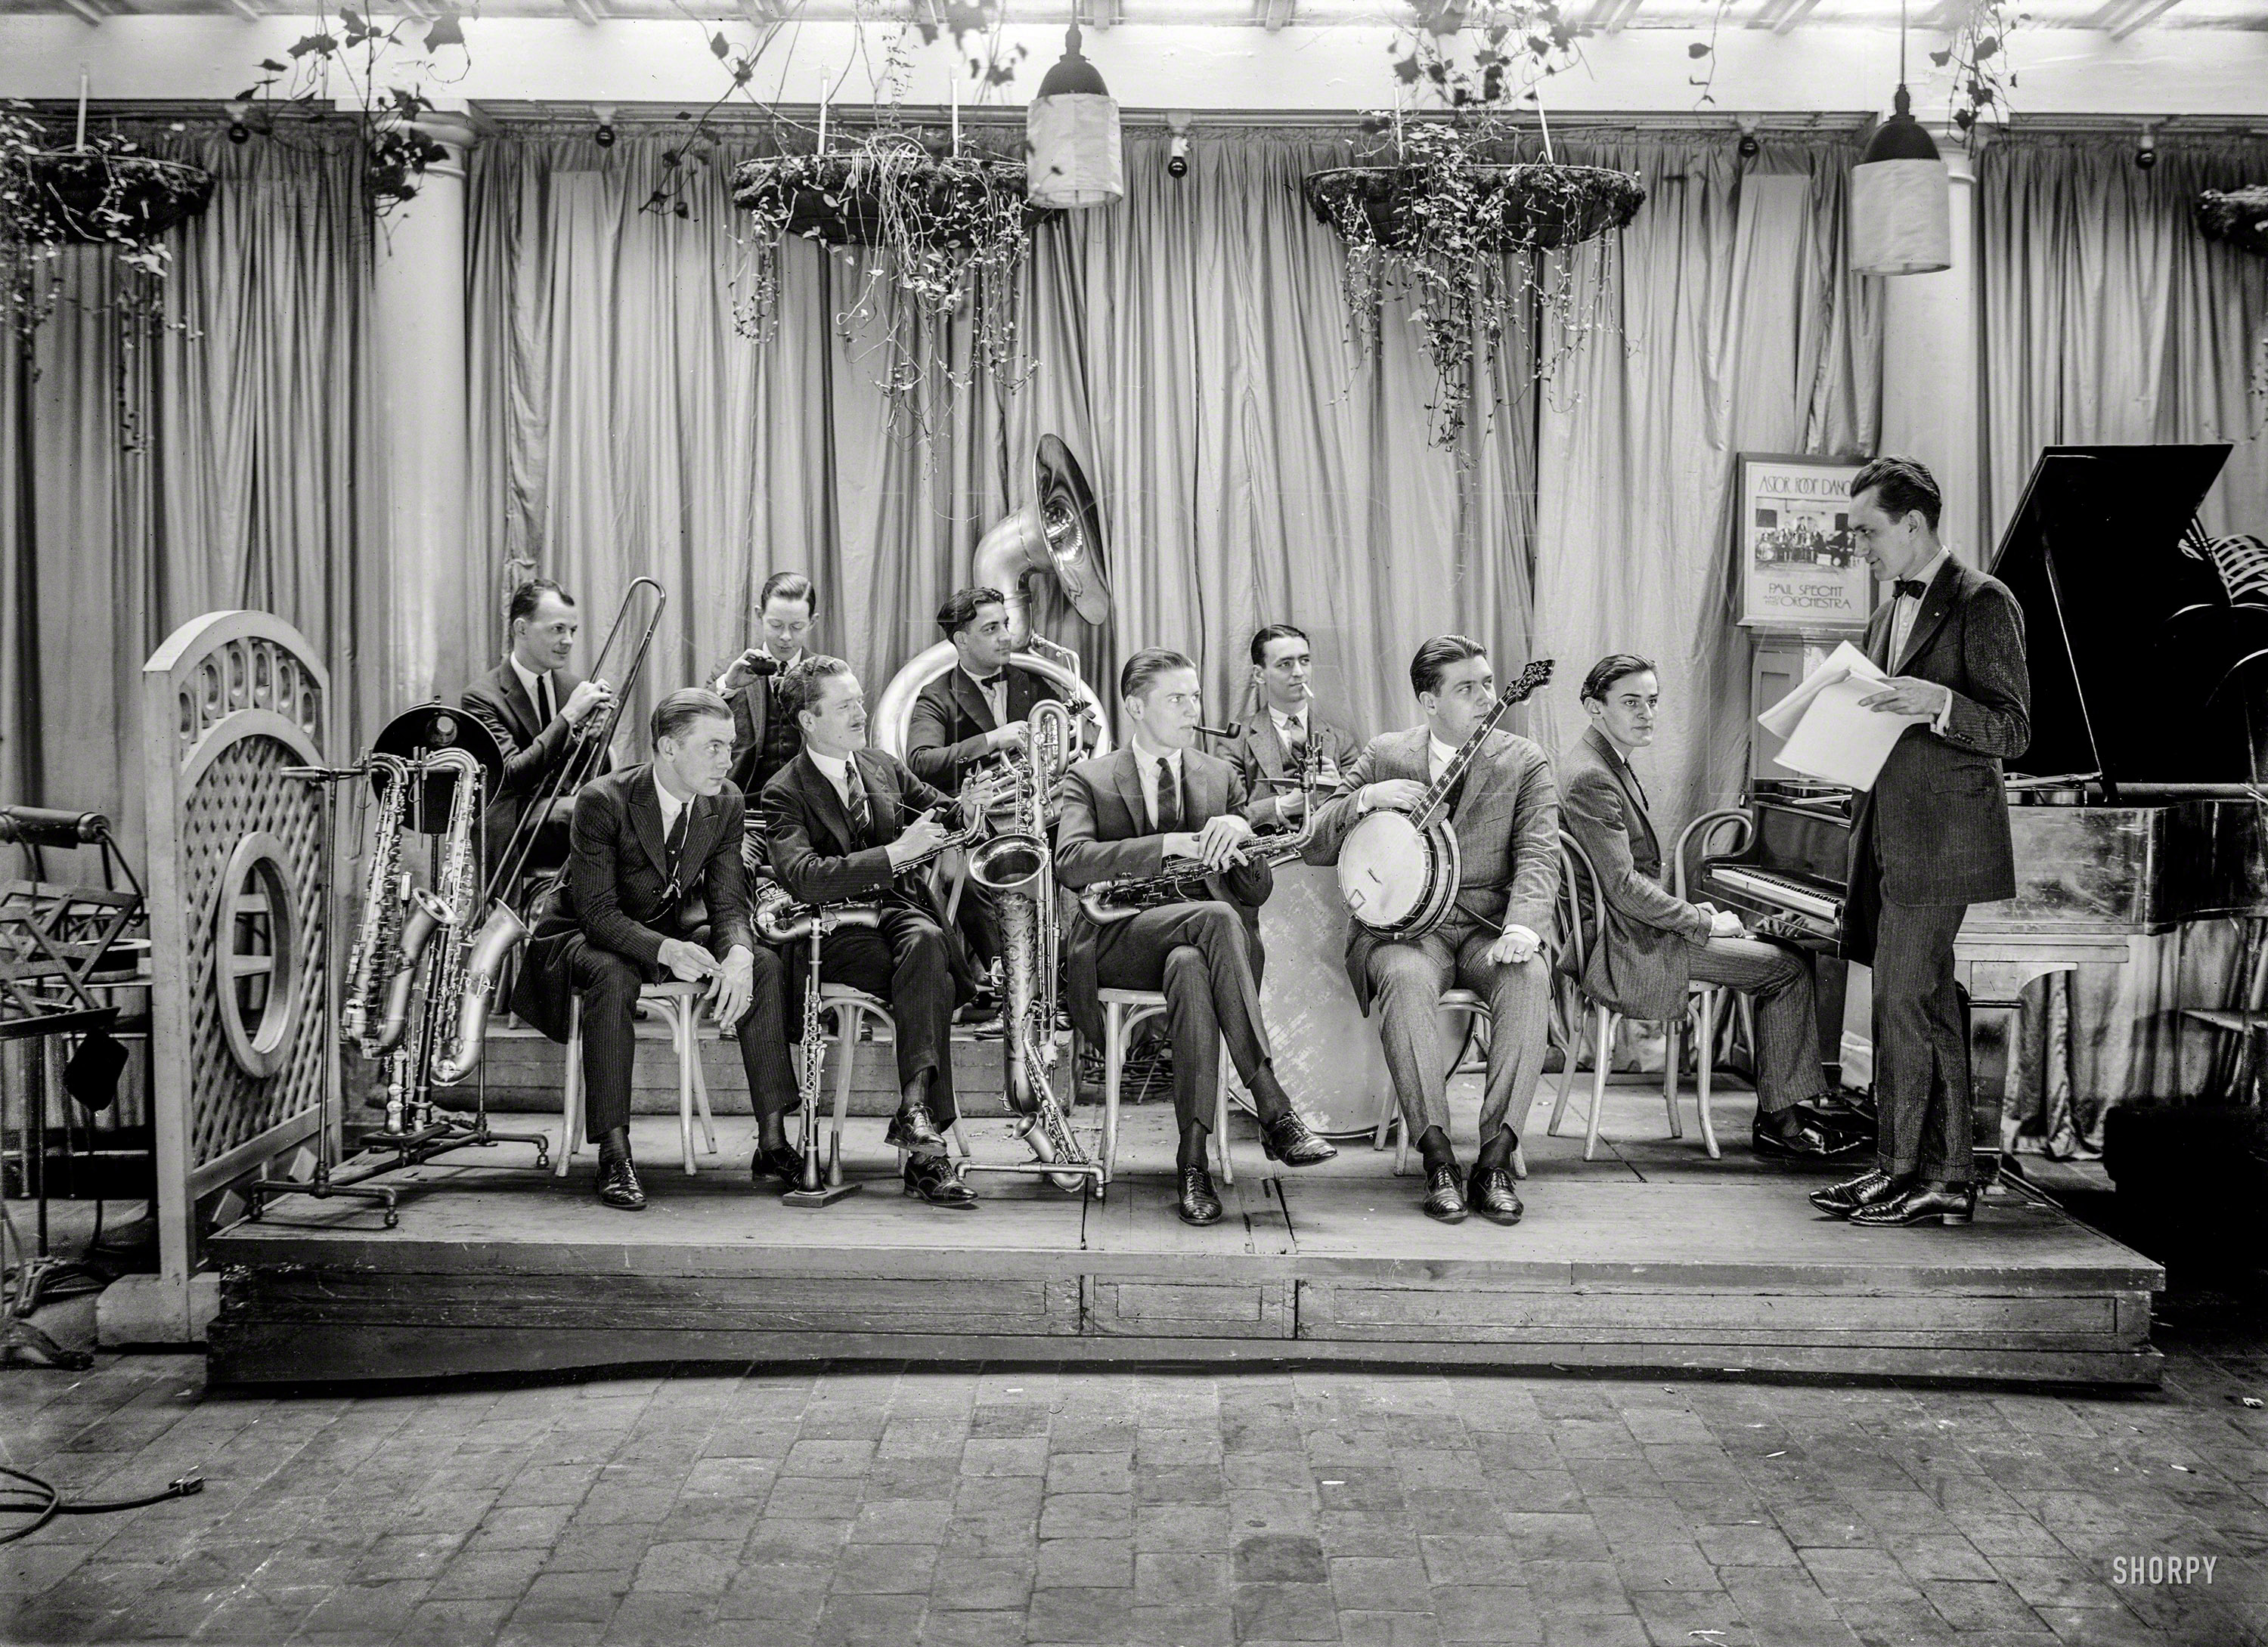 New York circa 1922. "Paul Specht Orchestra, Hotel Astor Roof Garden." Take five, boys, and don't burn the house down. 5x7 inch glass negative. View full size.